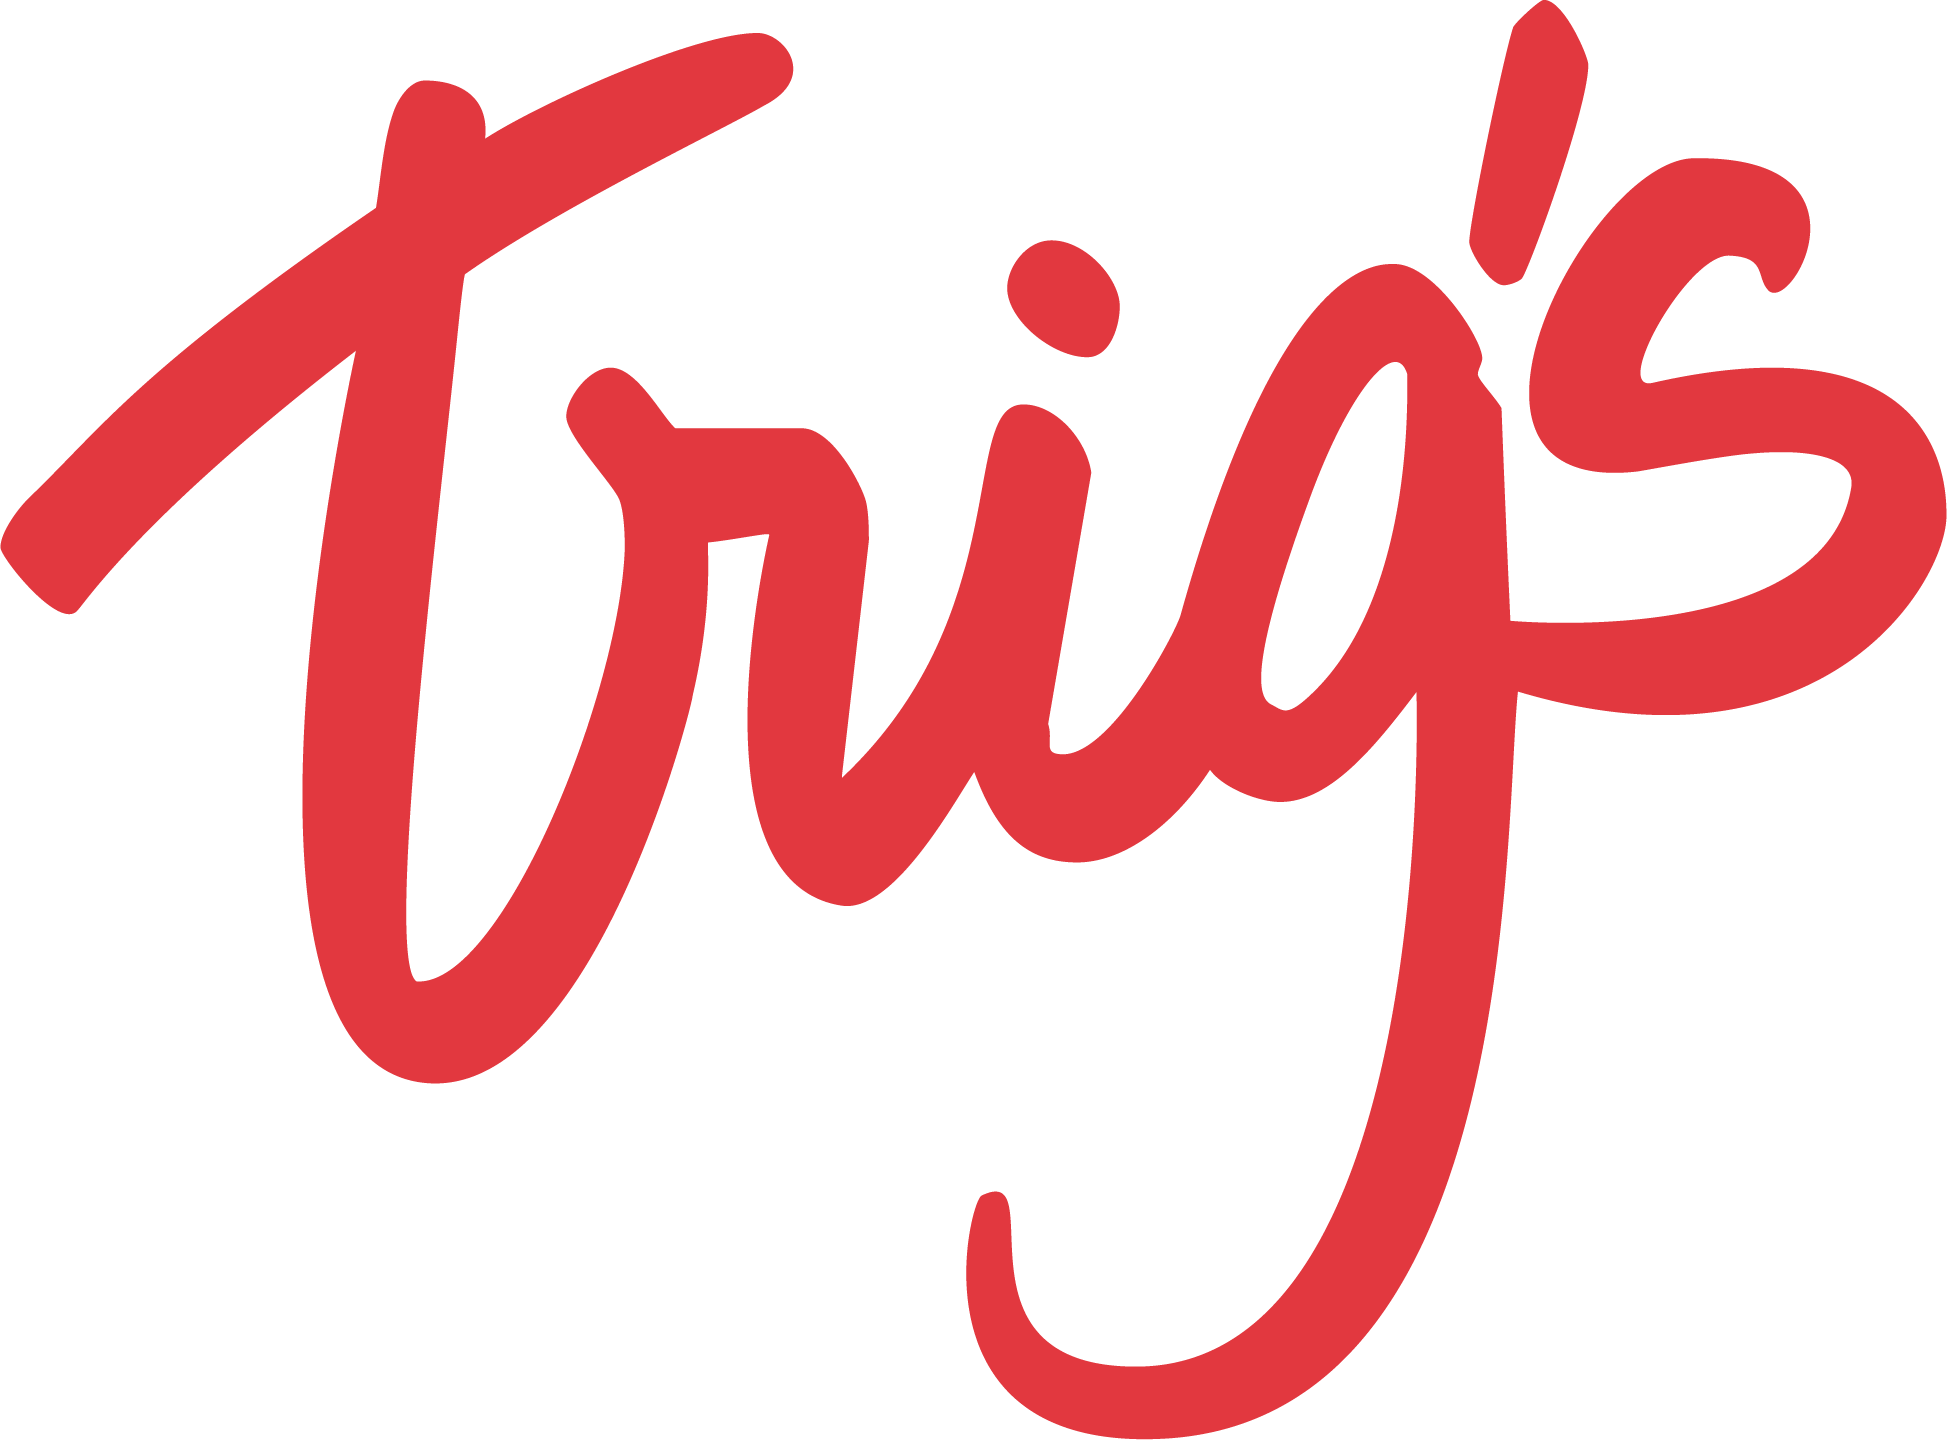 Trig S Grocery Store And Online Grocery Delivery